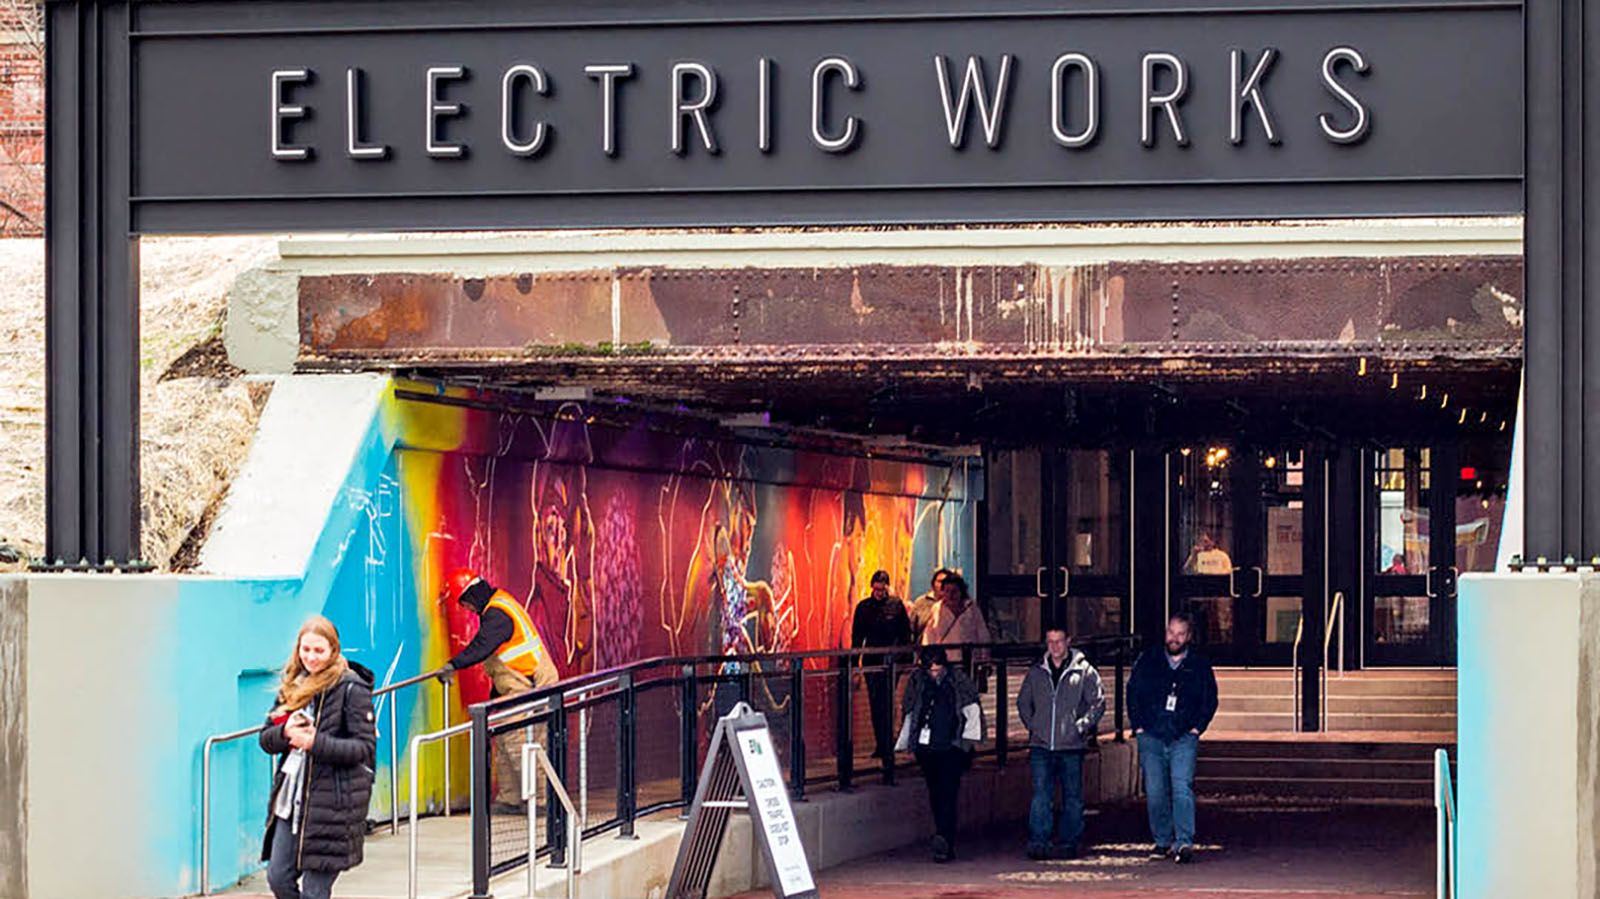 You may soon be able to consume alcoholic beverages outdoors at Electric Works.